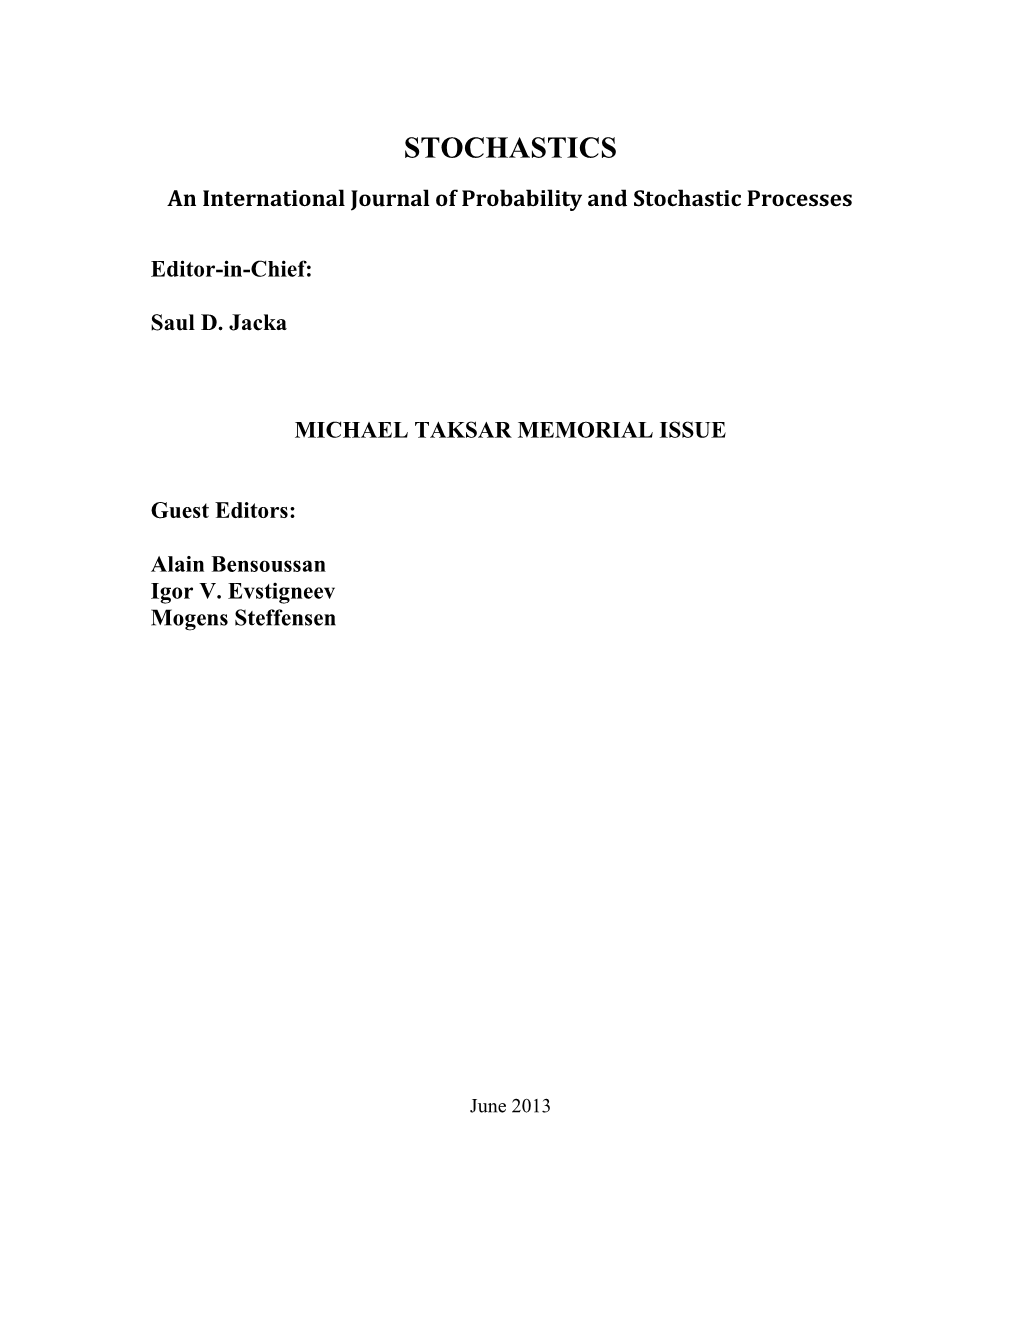 STOCHASTICS an International Journal of Probability and Stochastic Processes